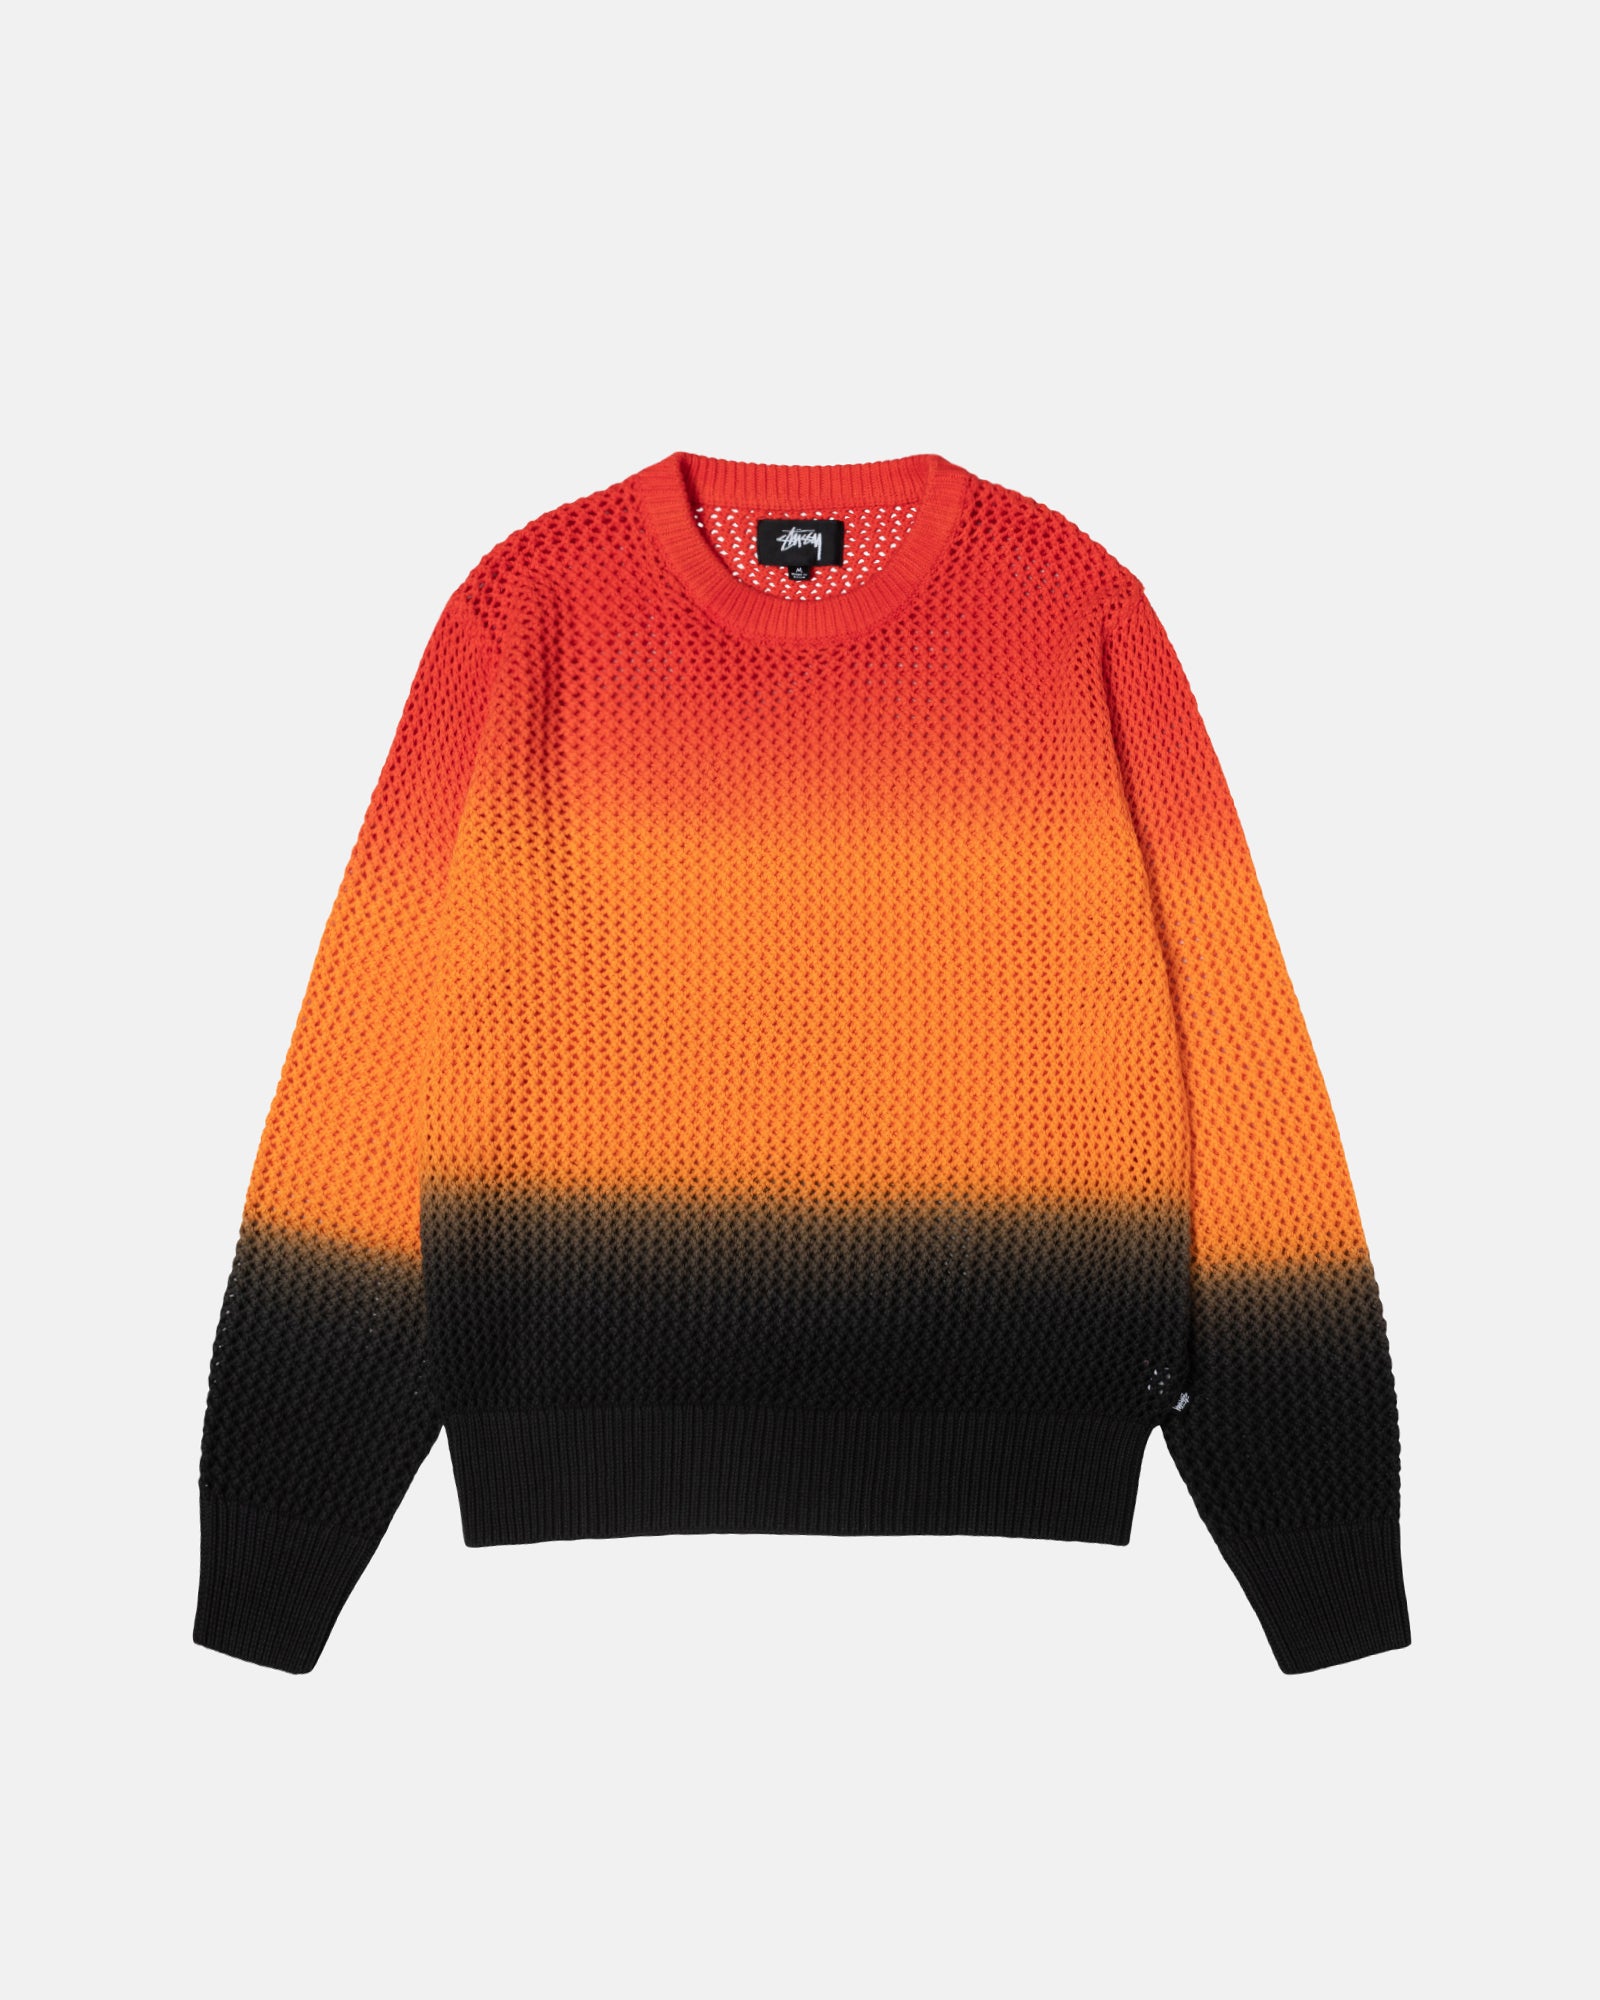 PIGMENT DYED LOOSE GAUGE SWEATER